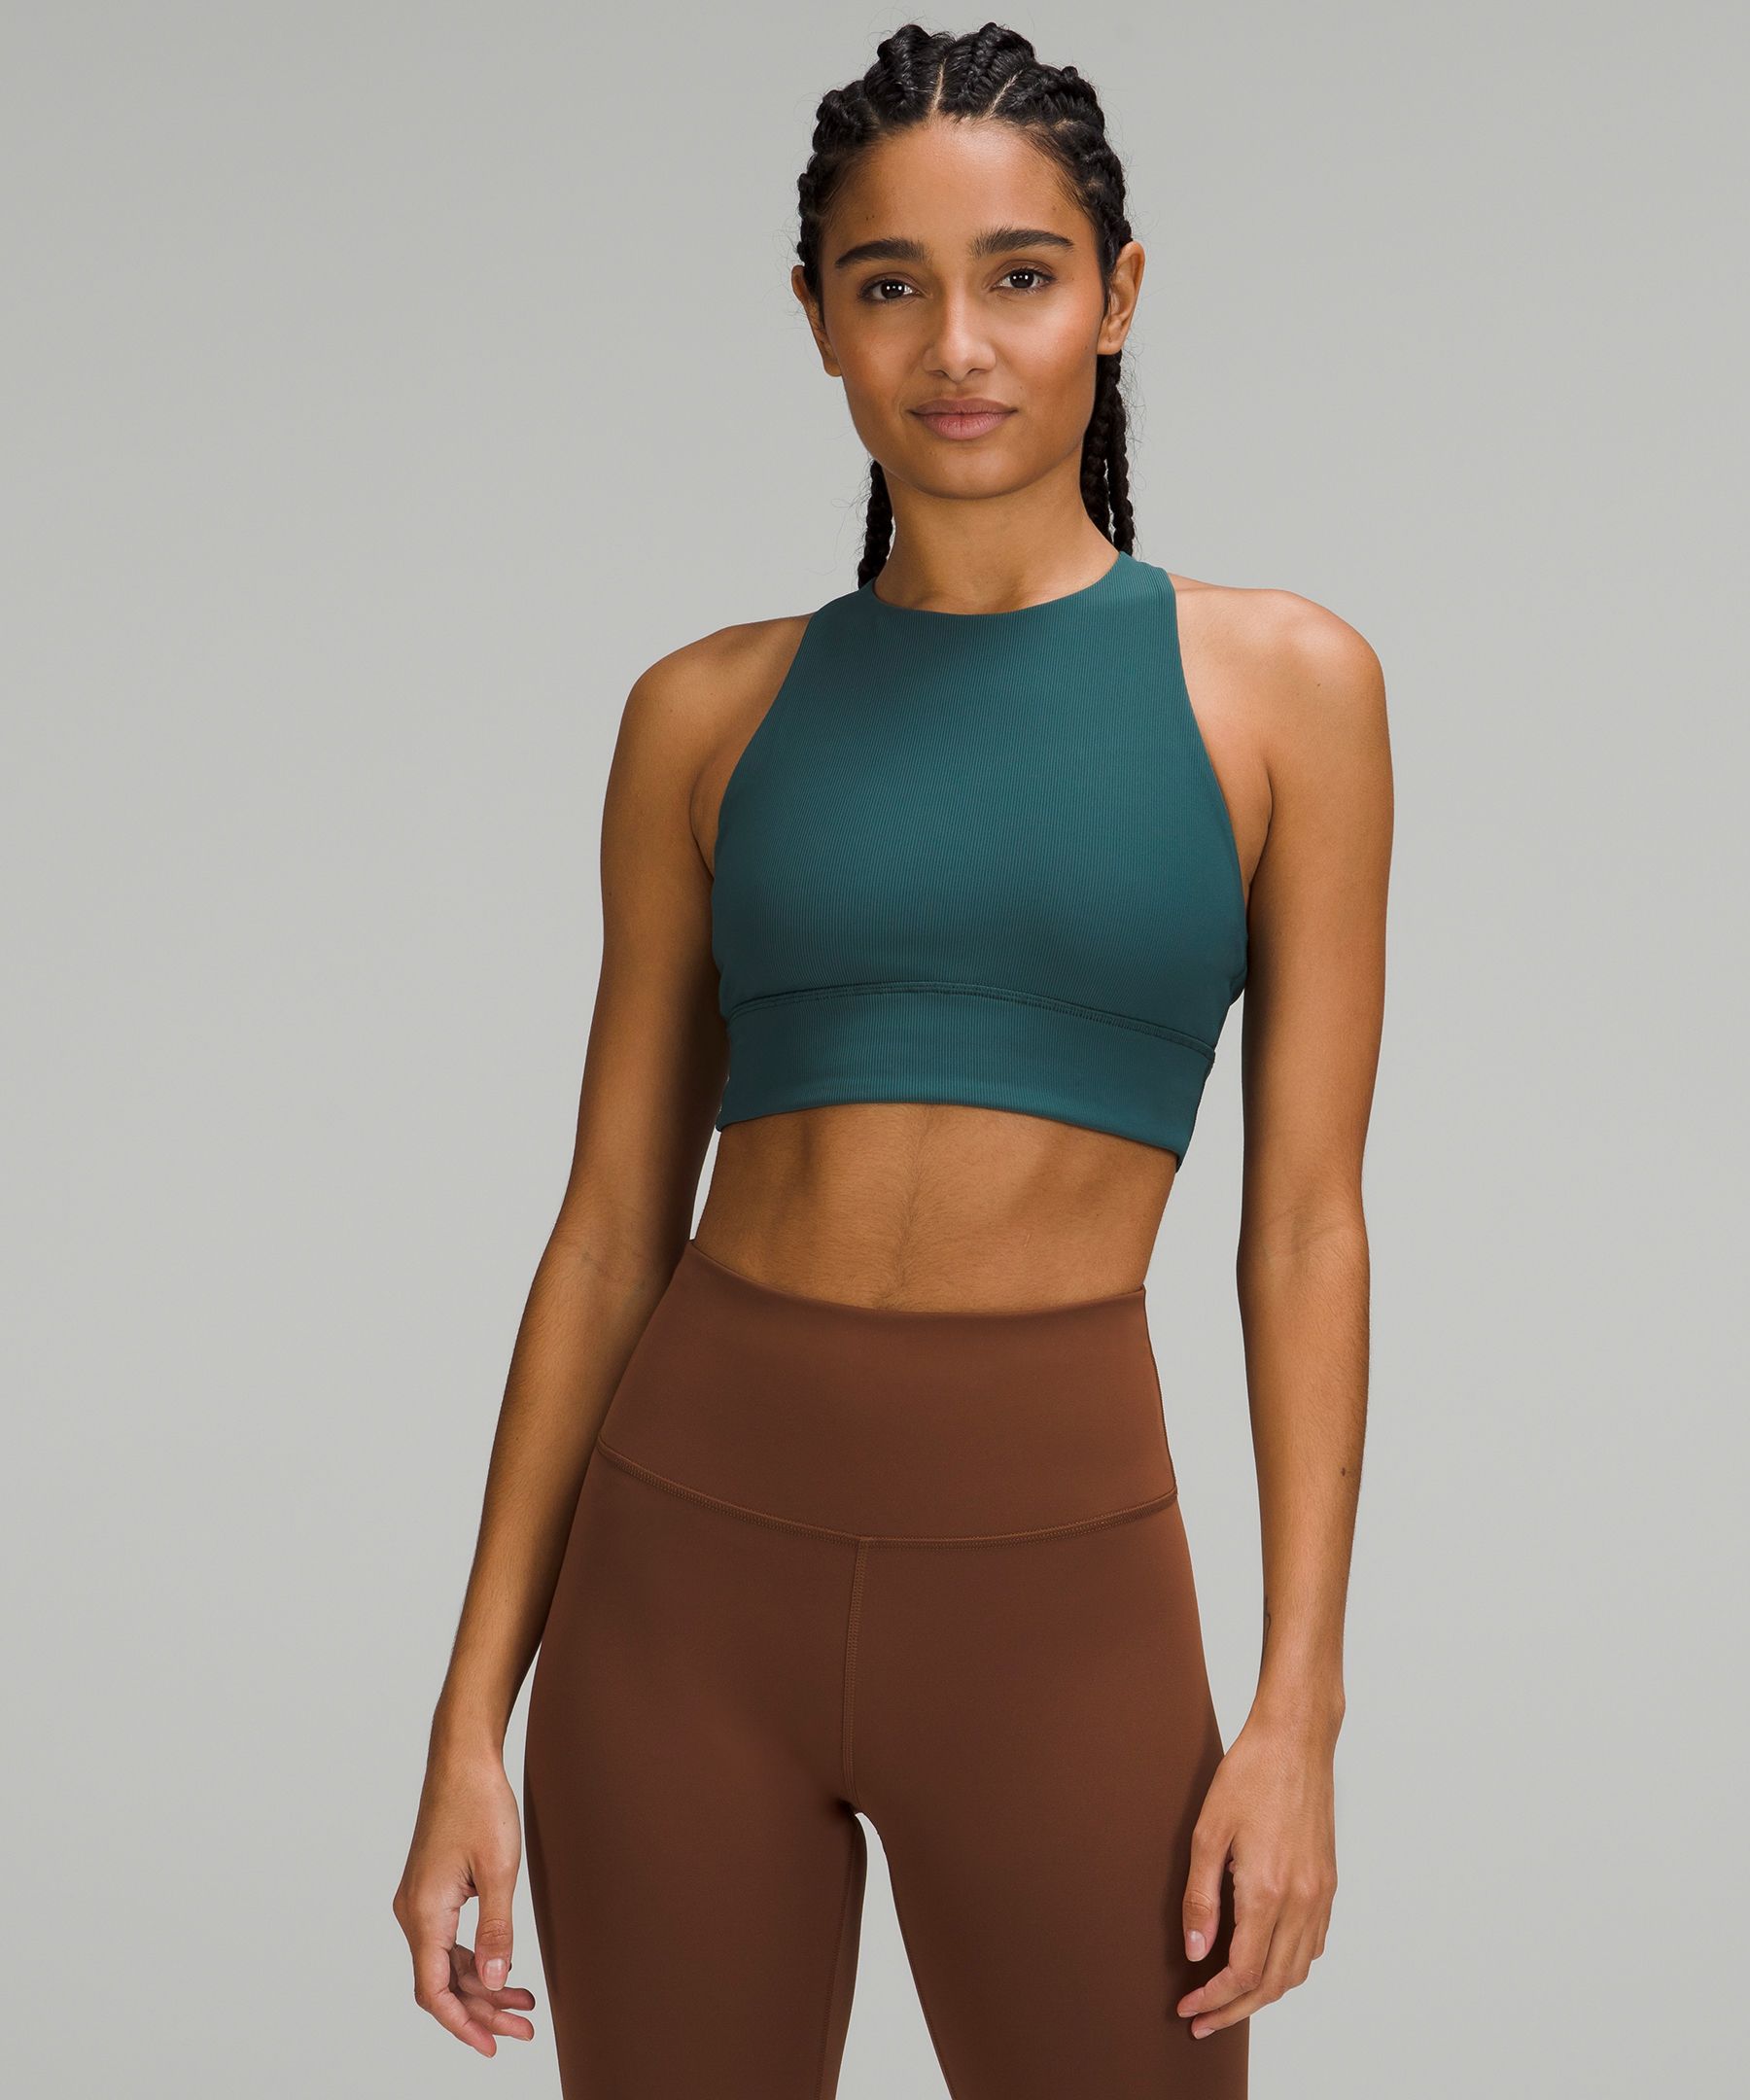 Get Up And Go Seamless Rib High-Neck Sports Bra